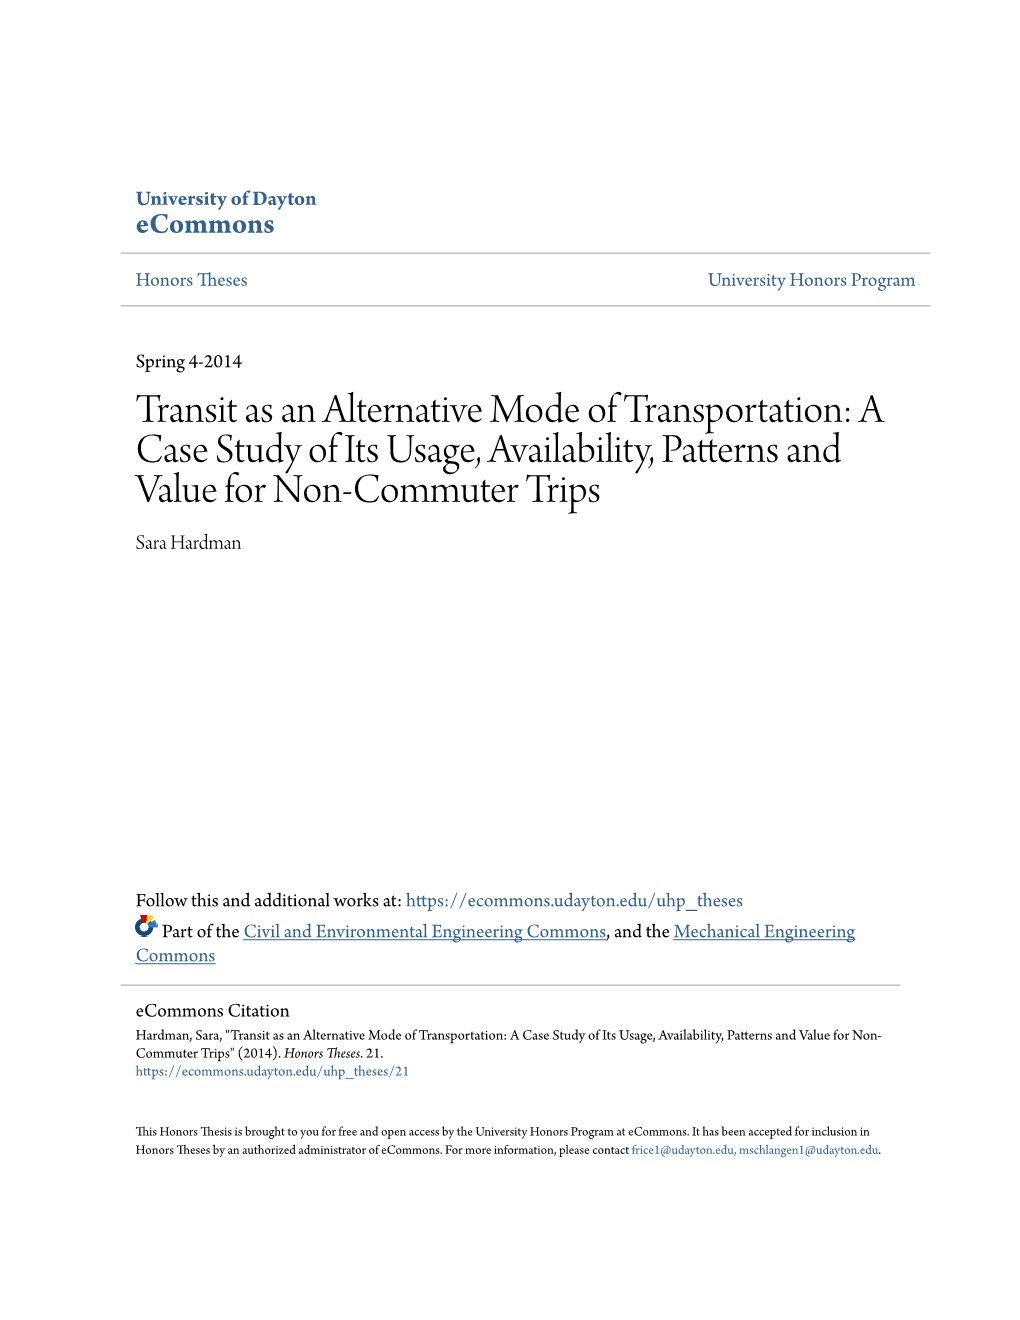 Transit As an Alternative Mode of Transportation: a Case Study of Its Usage, Availability, Patterns and Value for Non-Commuter Trips Sara Hardman